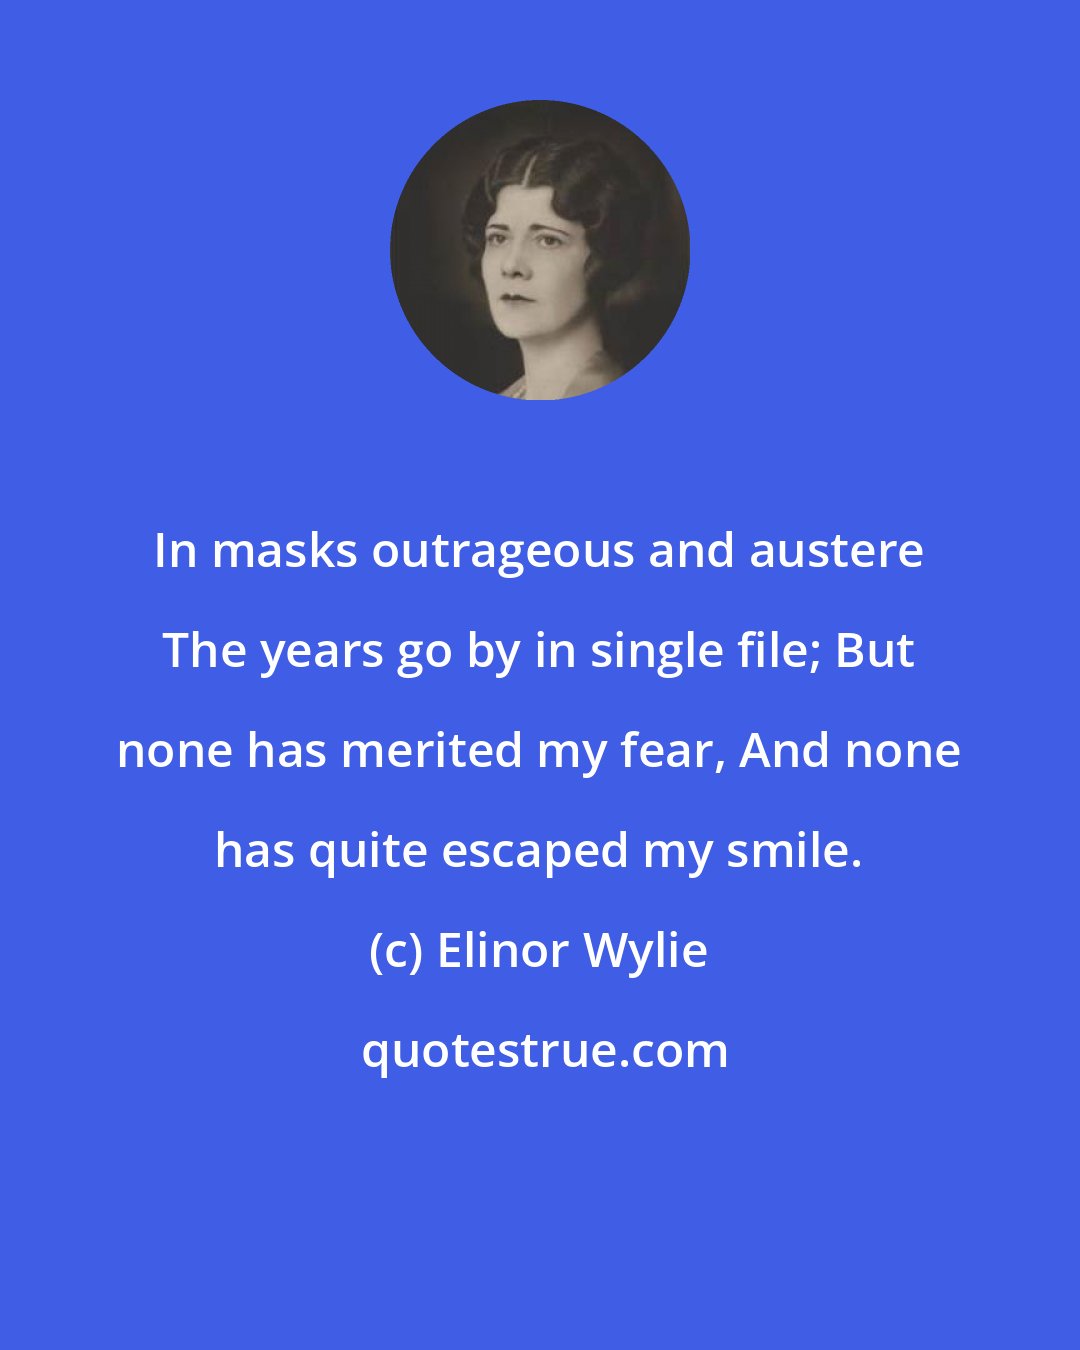 Elinor Wylie: In masks outrageous and austere The years go by in single file; But none has merited my fear, And none has quite escaped my smile.